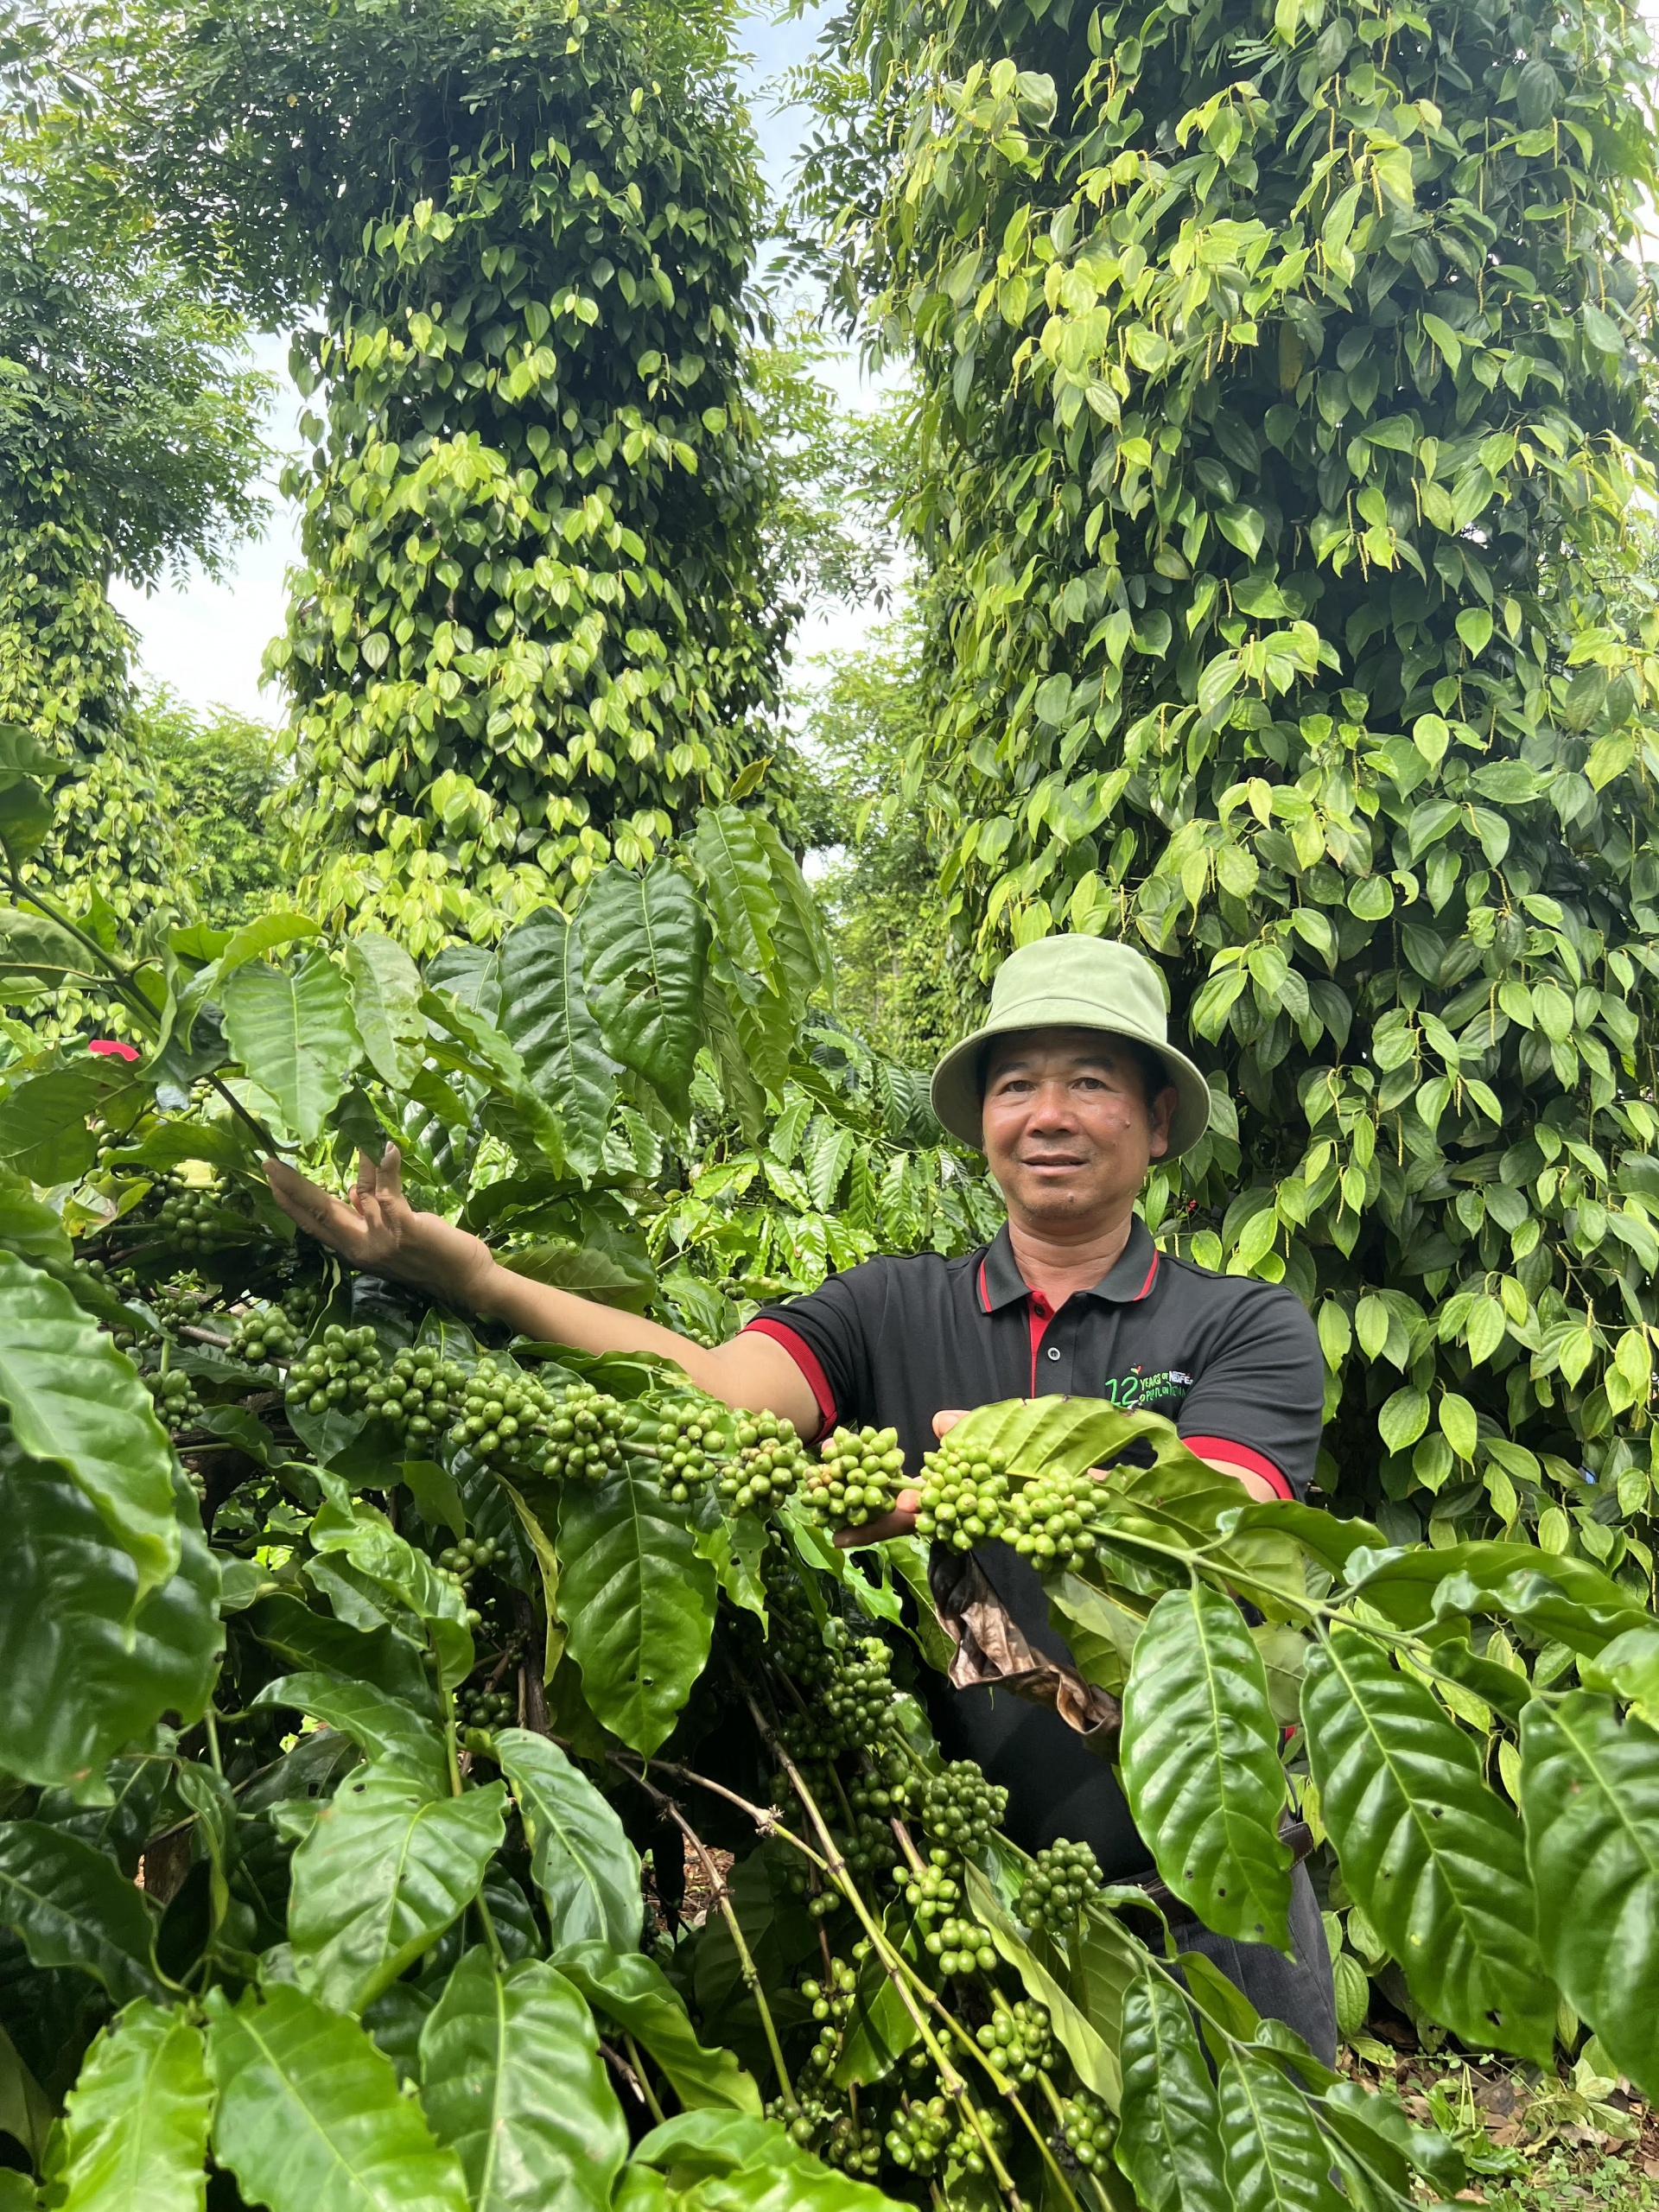 Vietnam is moving towards a sustainable regenerative agriculture